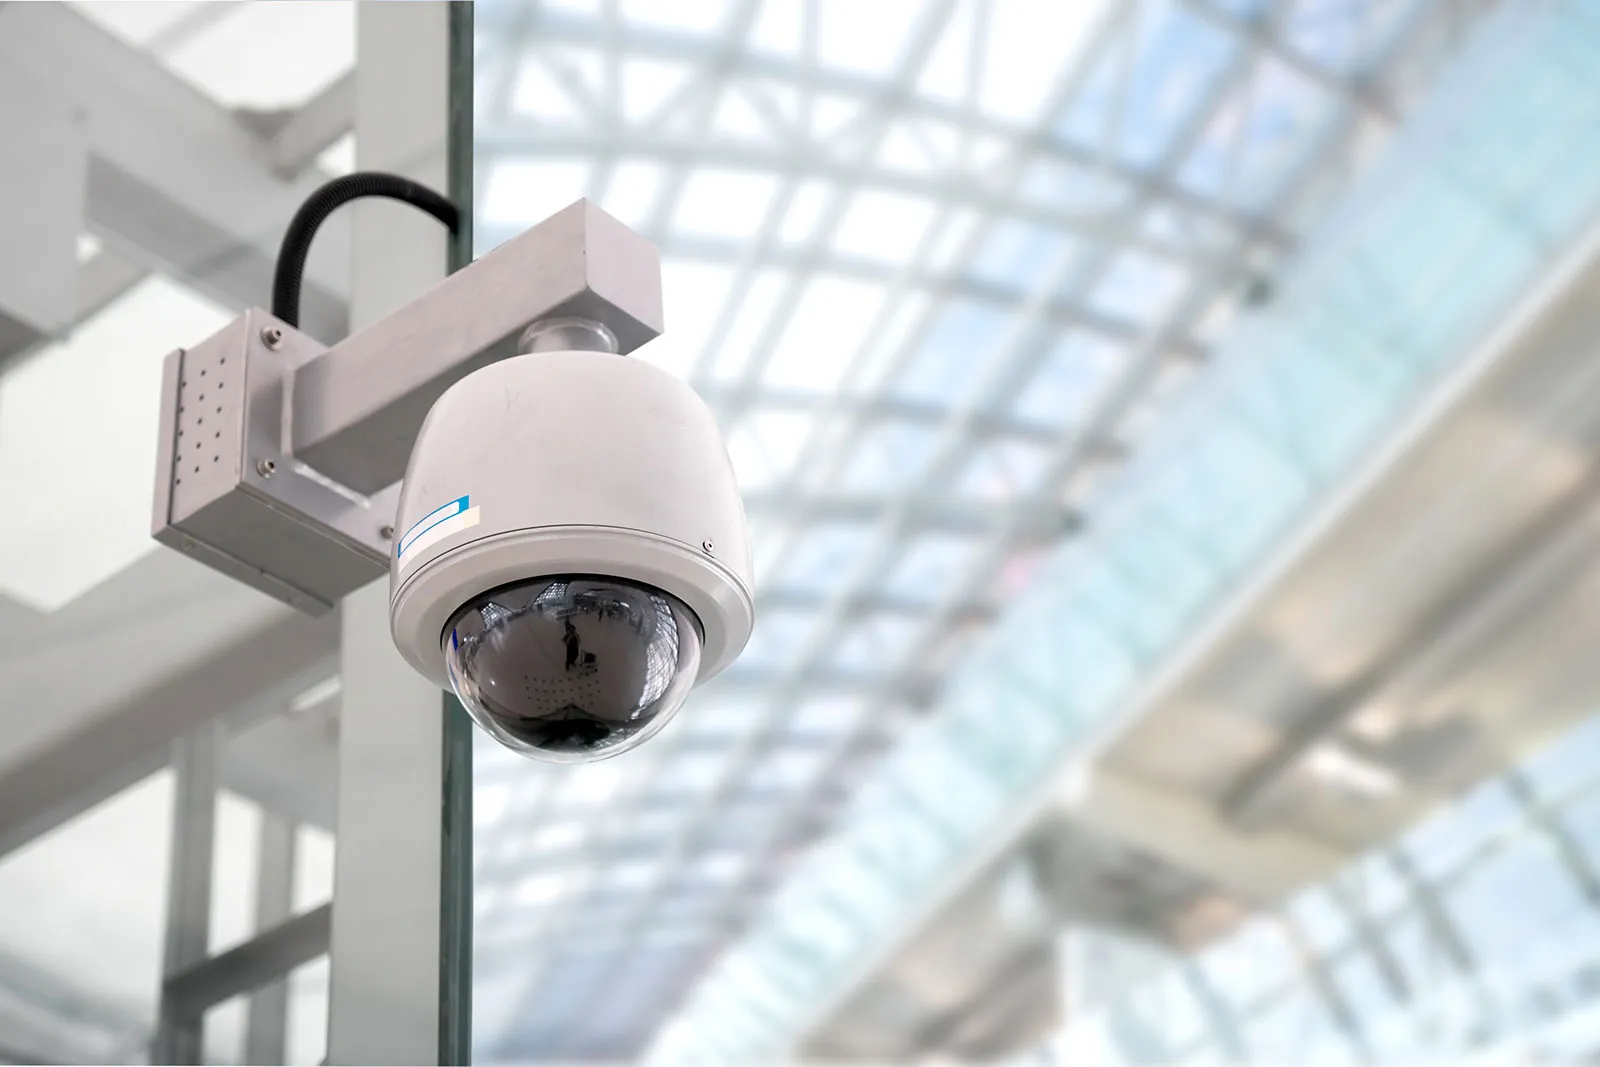 BTS offers a full line of surveillance camera’s recorders, and surveillance software to fit your business needs.